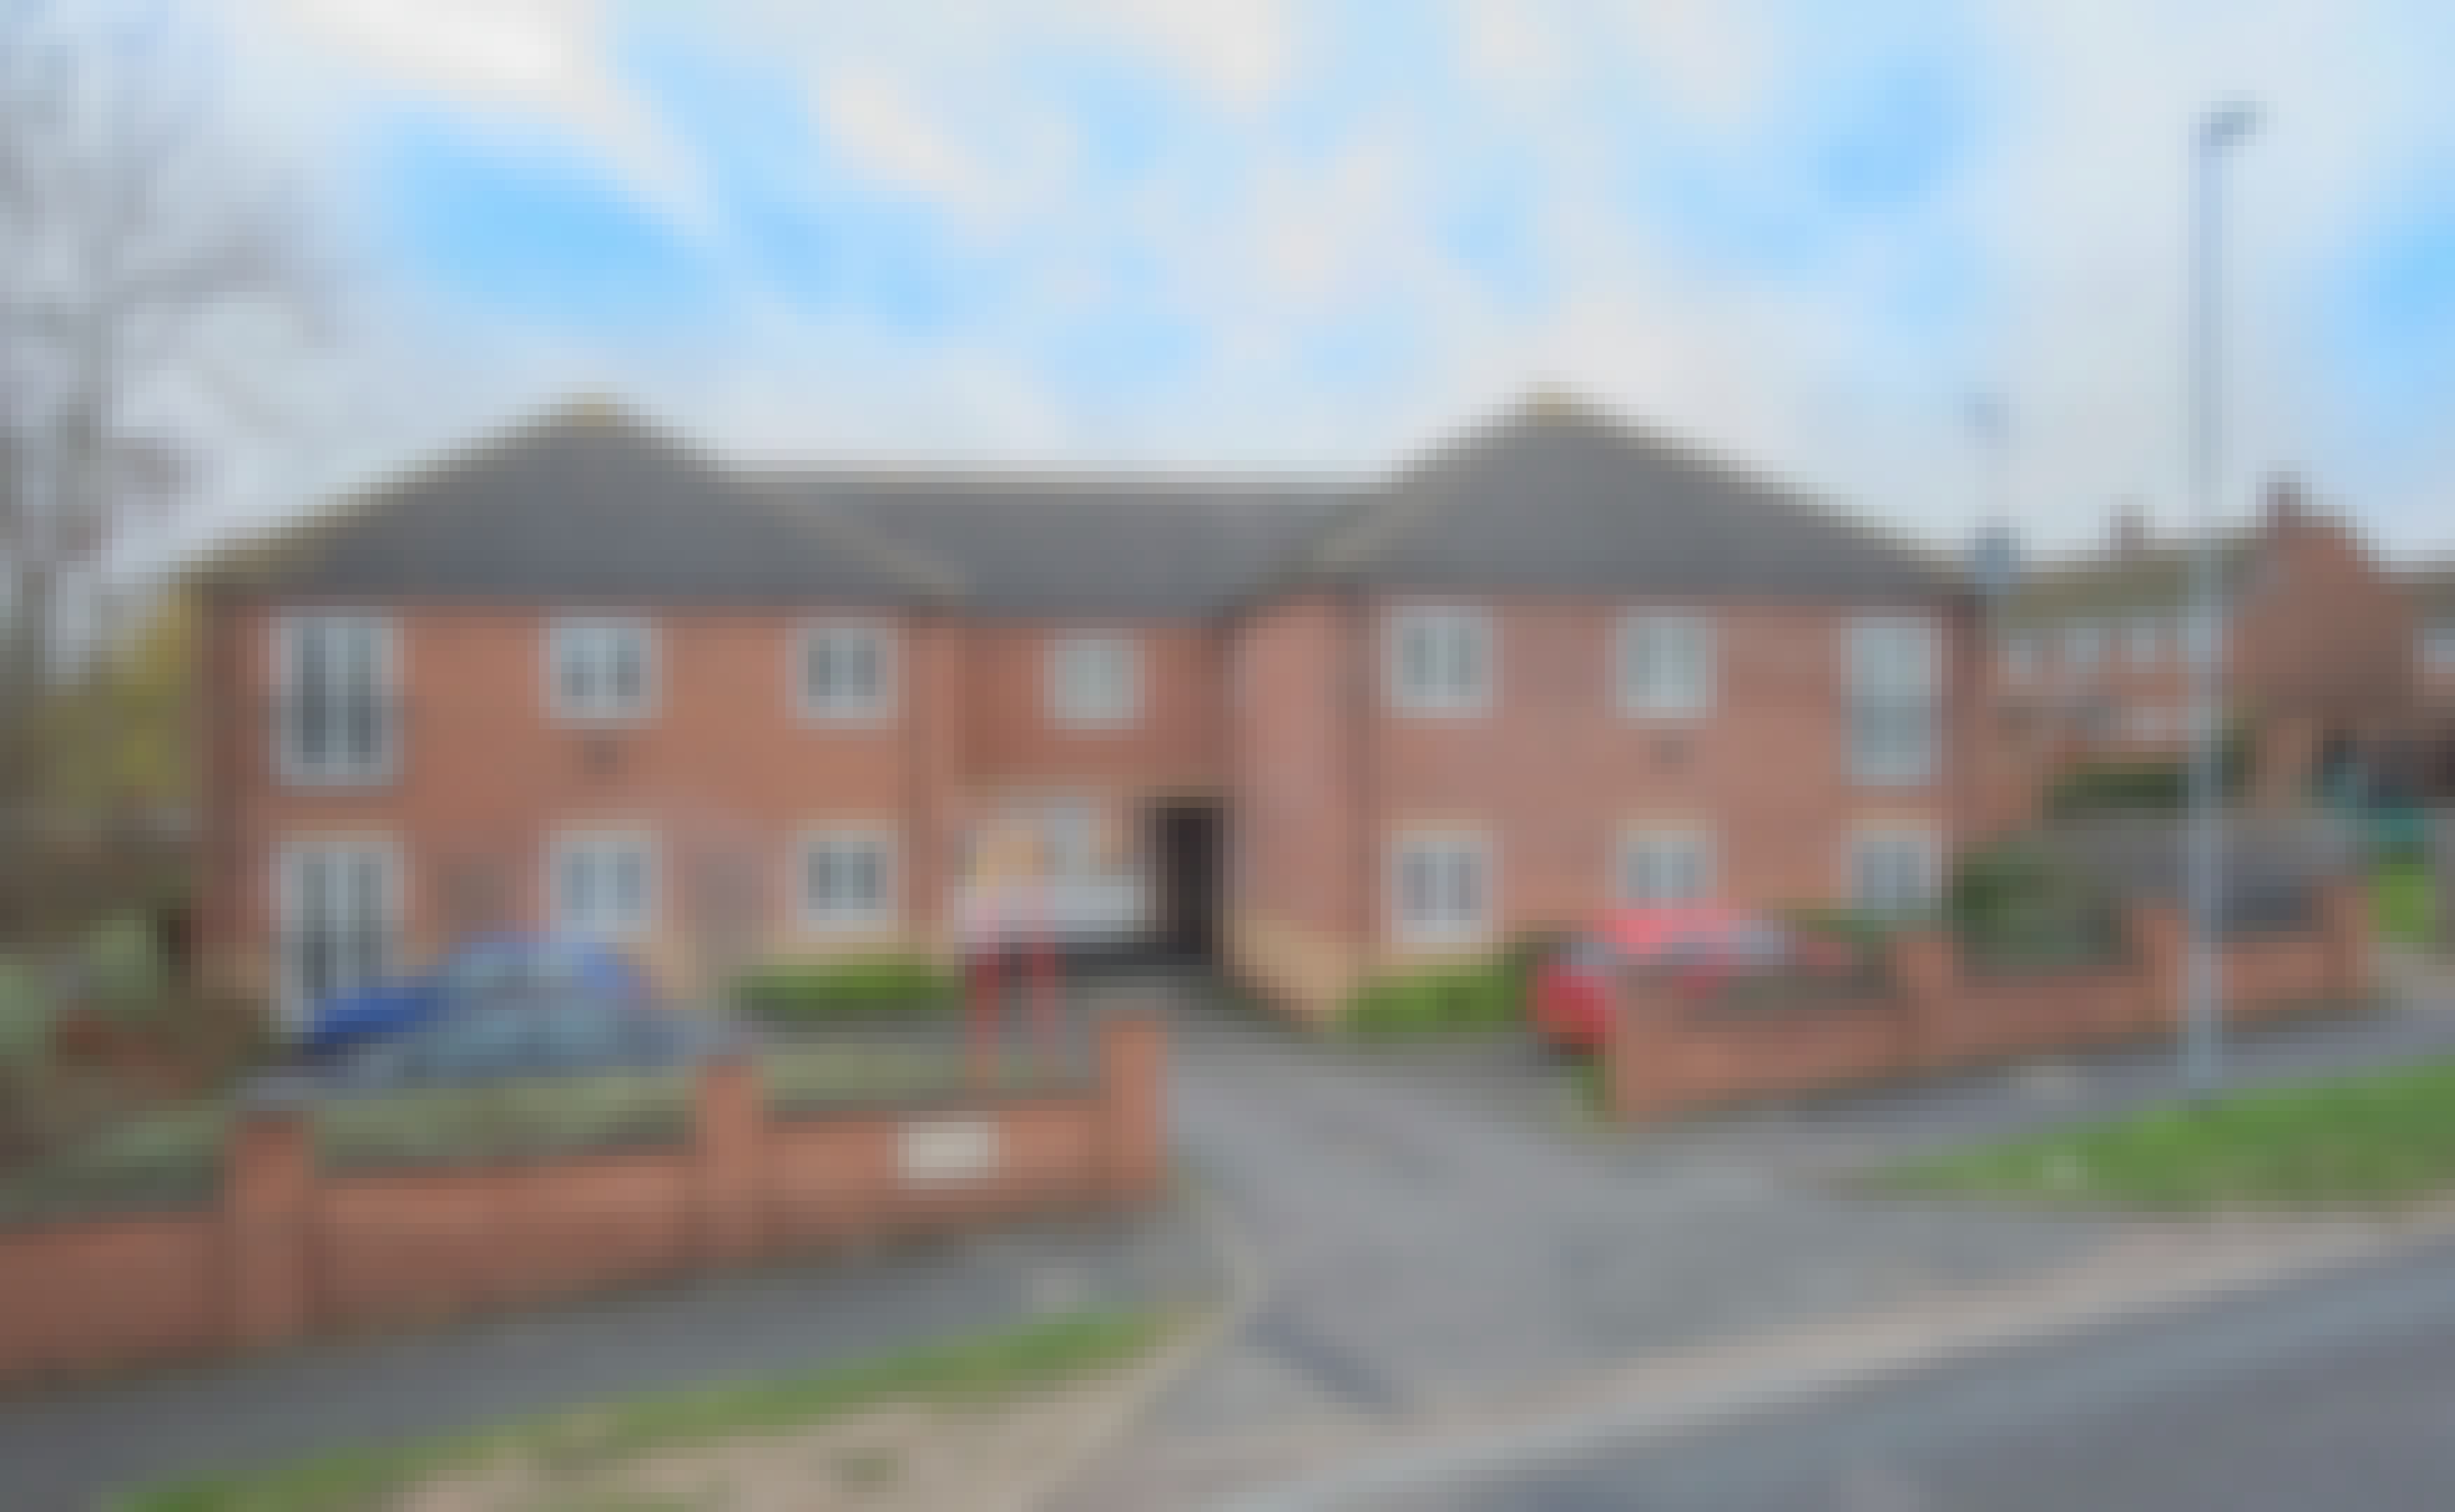 Overview image #1 for Denby Dale Place, Corby, NN17